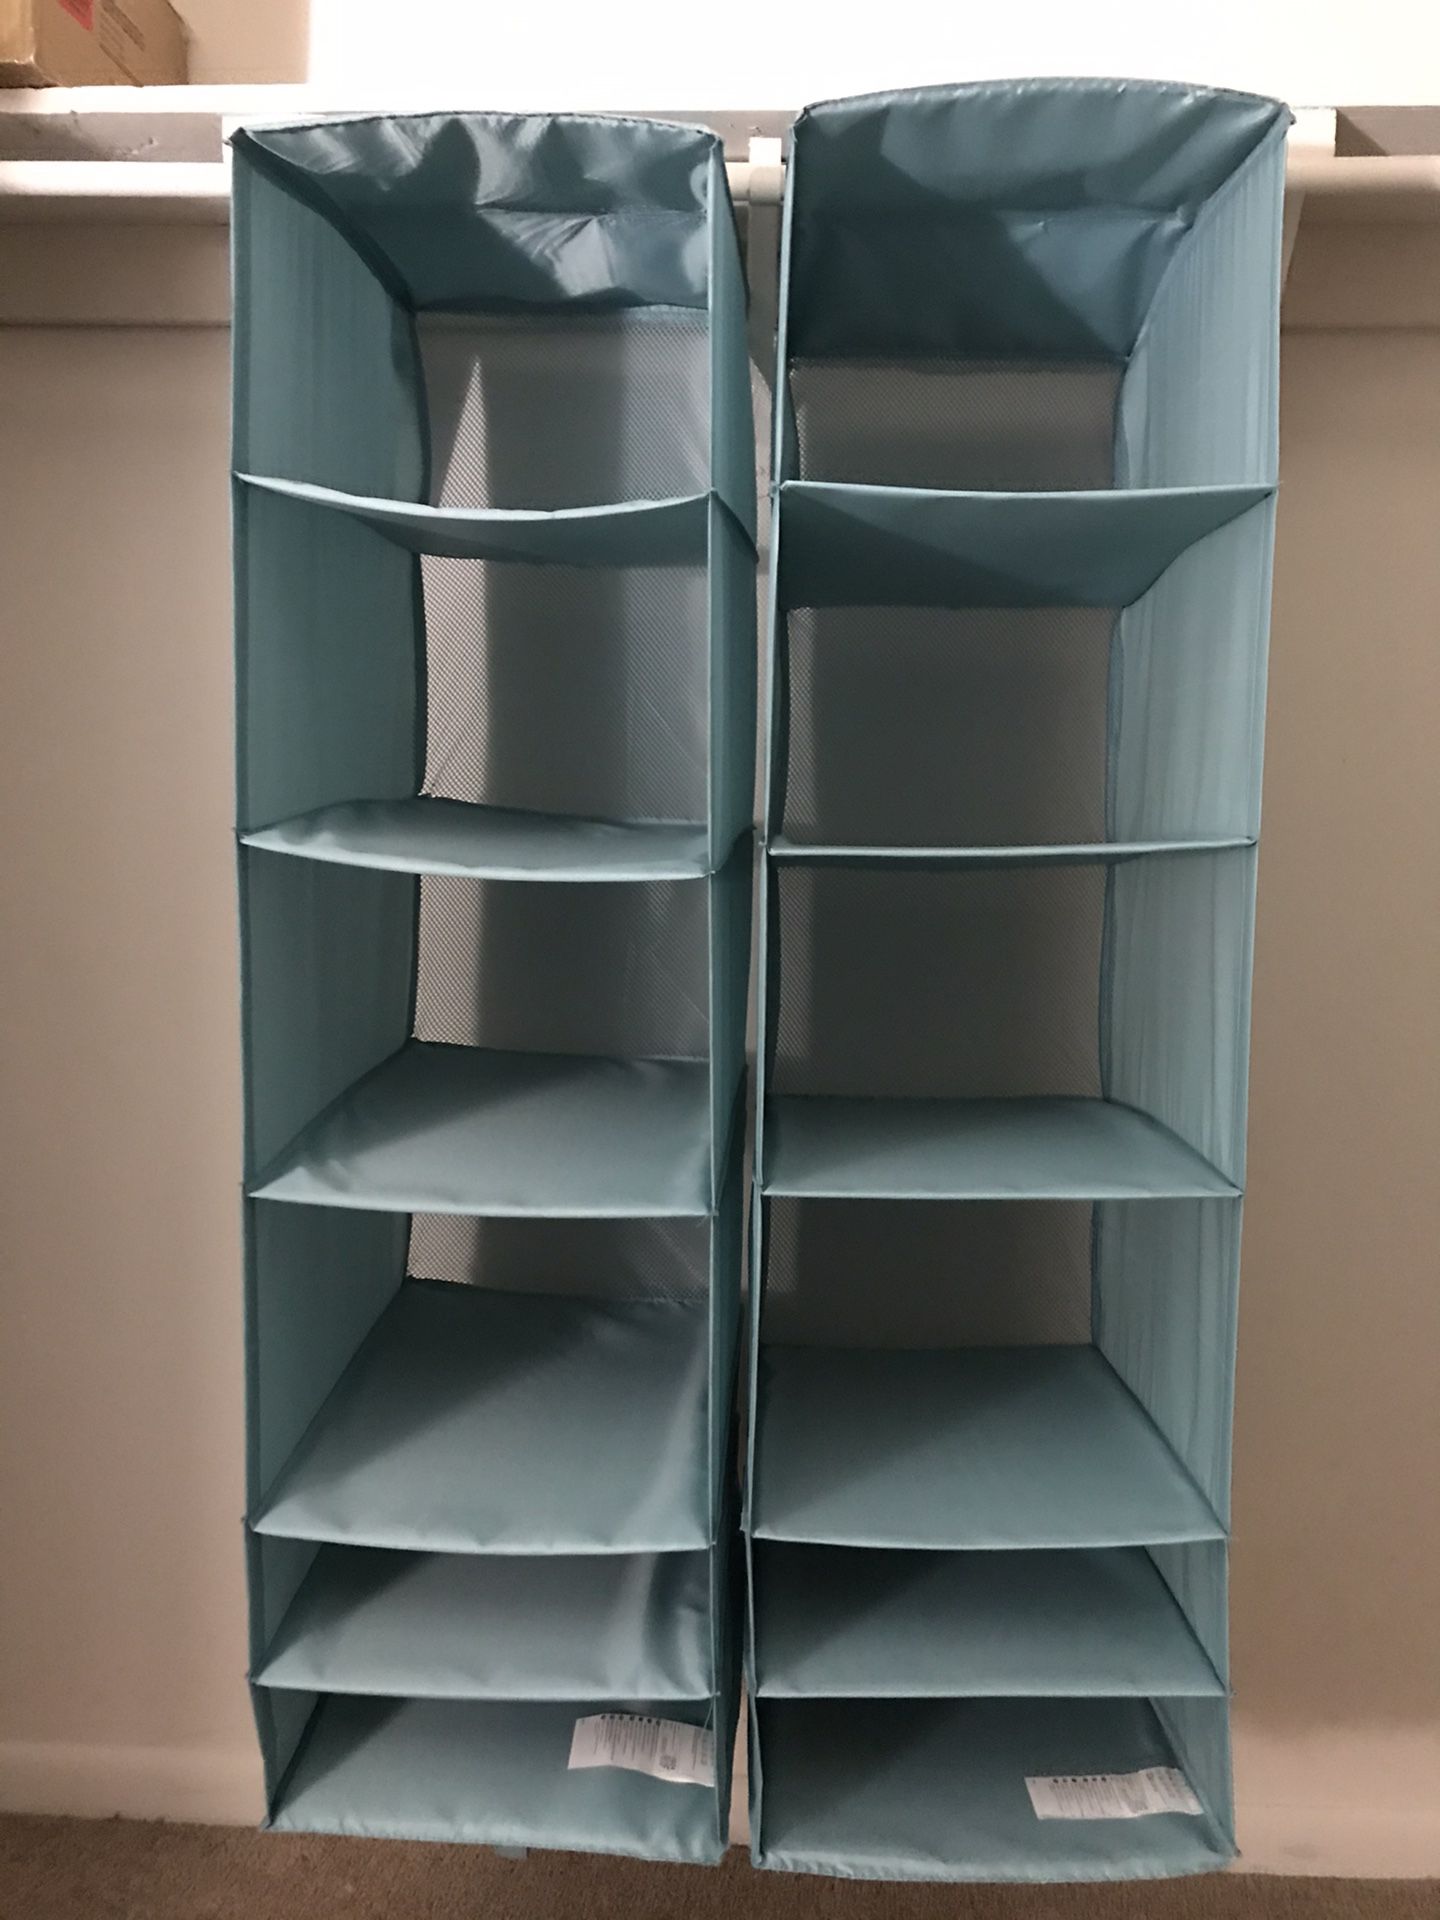 Soft Fabric Over Closet Rod Hanging Storage Organizer with 6 Shelves for Child/Kids Room